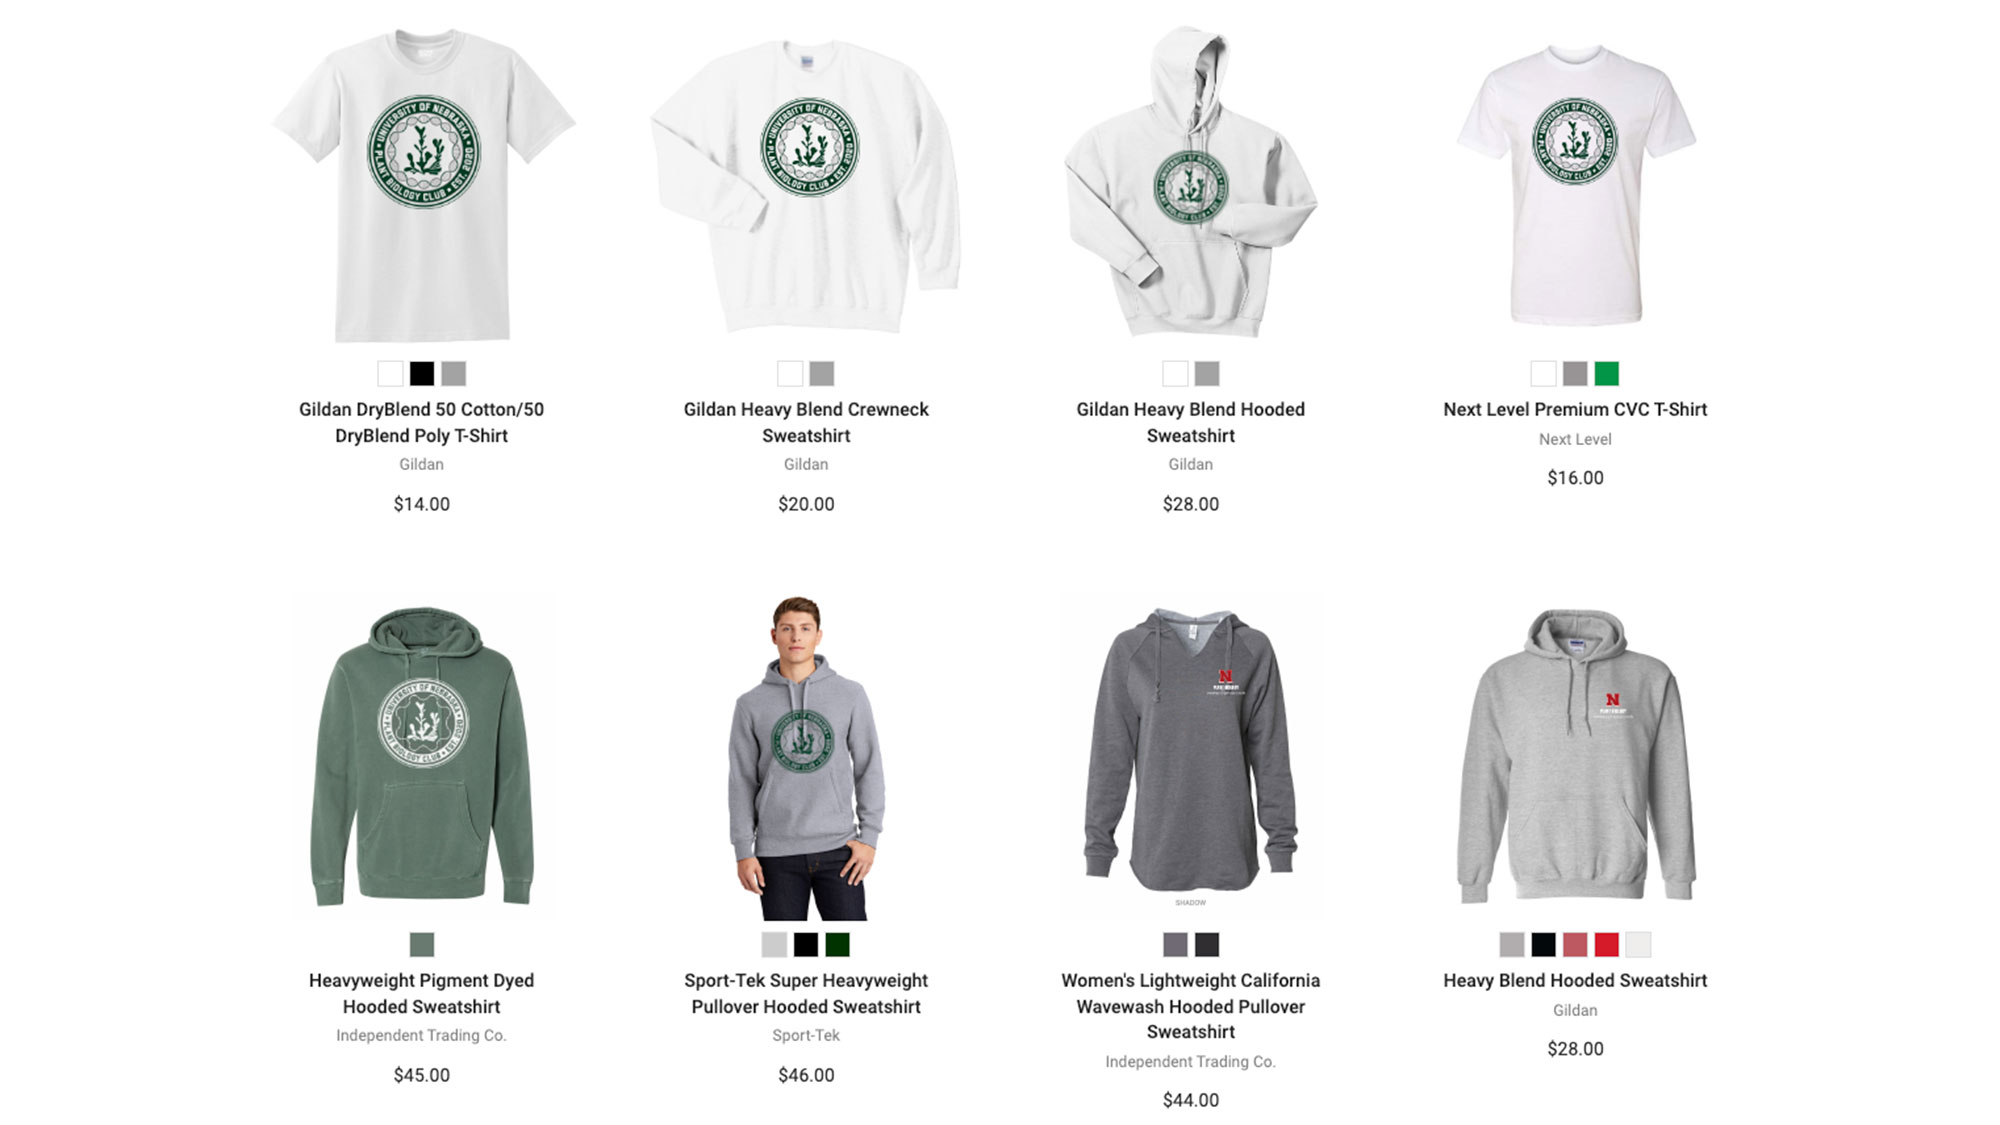 The University of Nebraska–Lincoln Plant Biology Club has apparel available for online orders until March 10.